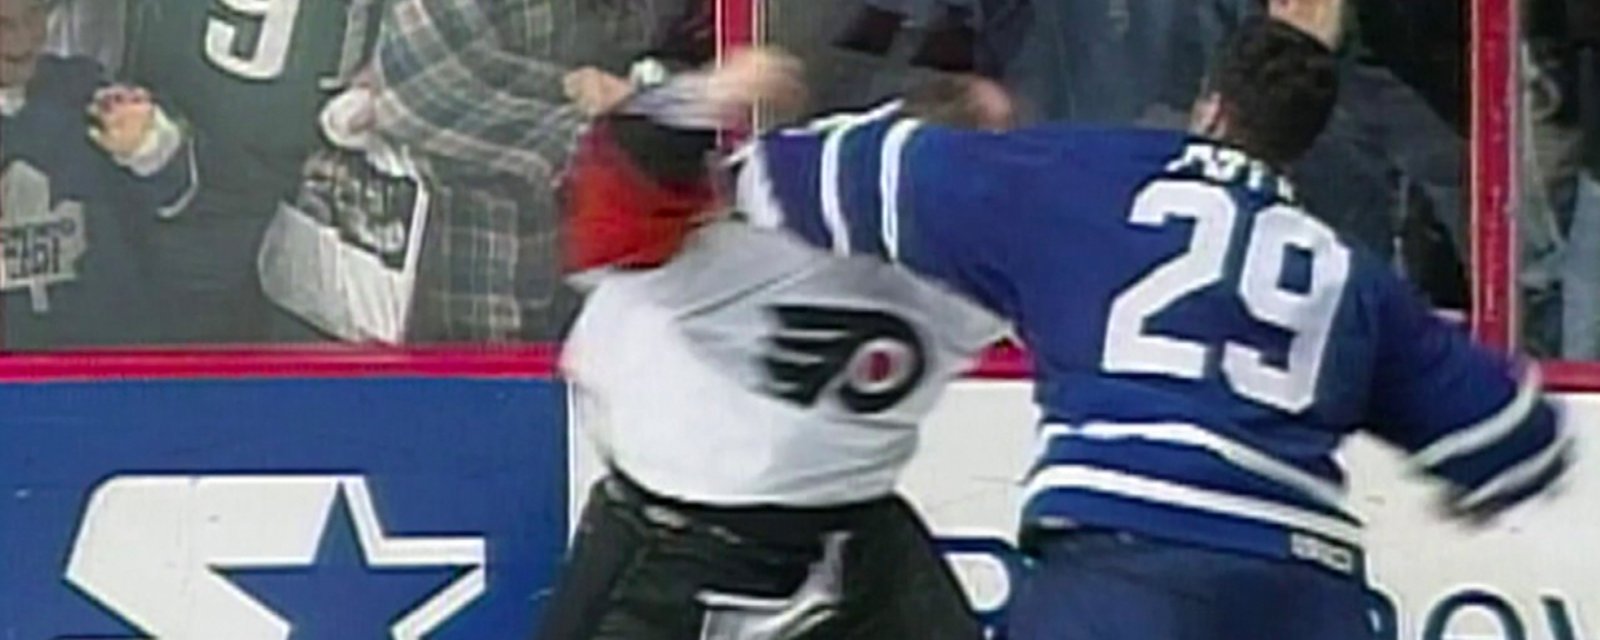 Throwback: Potvin beats the wheels off Hextall in the greatest goalie scrap of all time